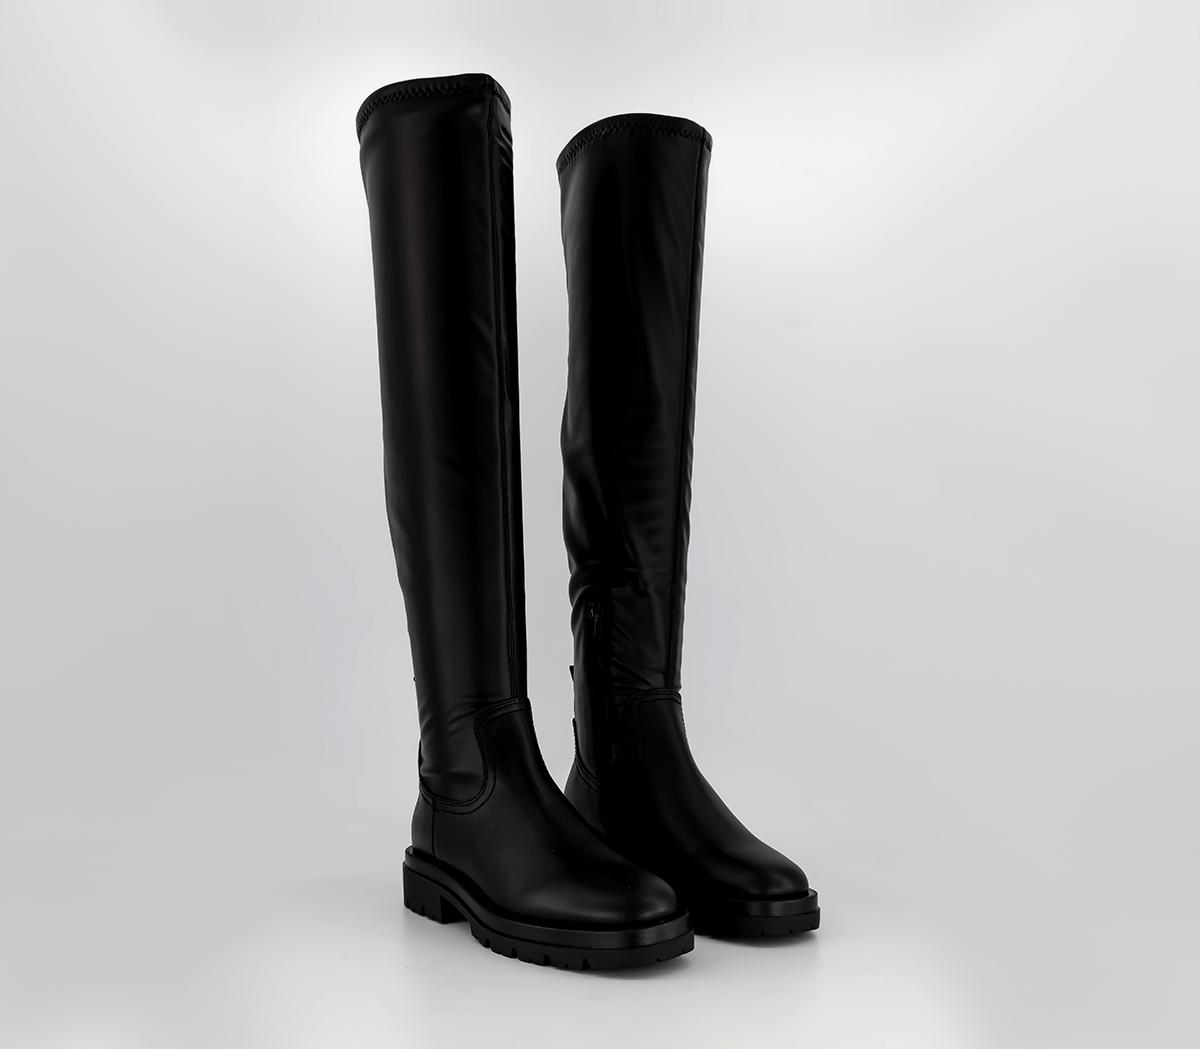 EARTHADDICT Tierra Over The Knee Boots Black - Knee High Boots